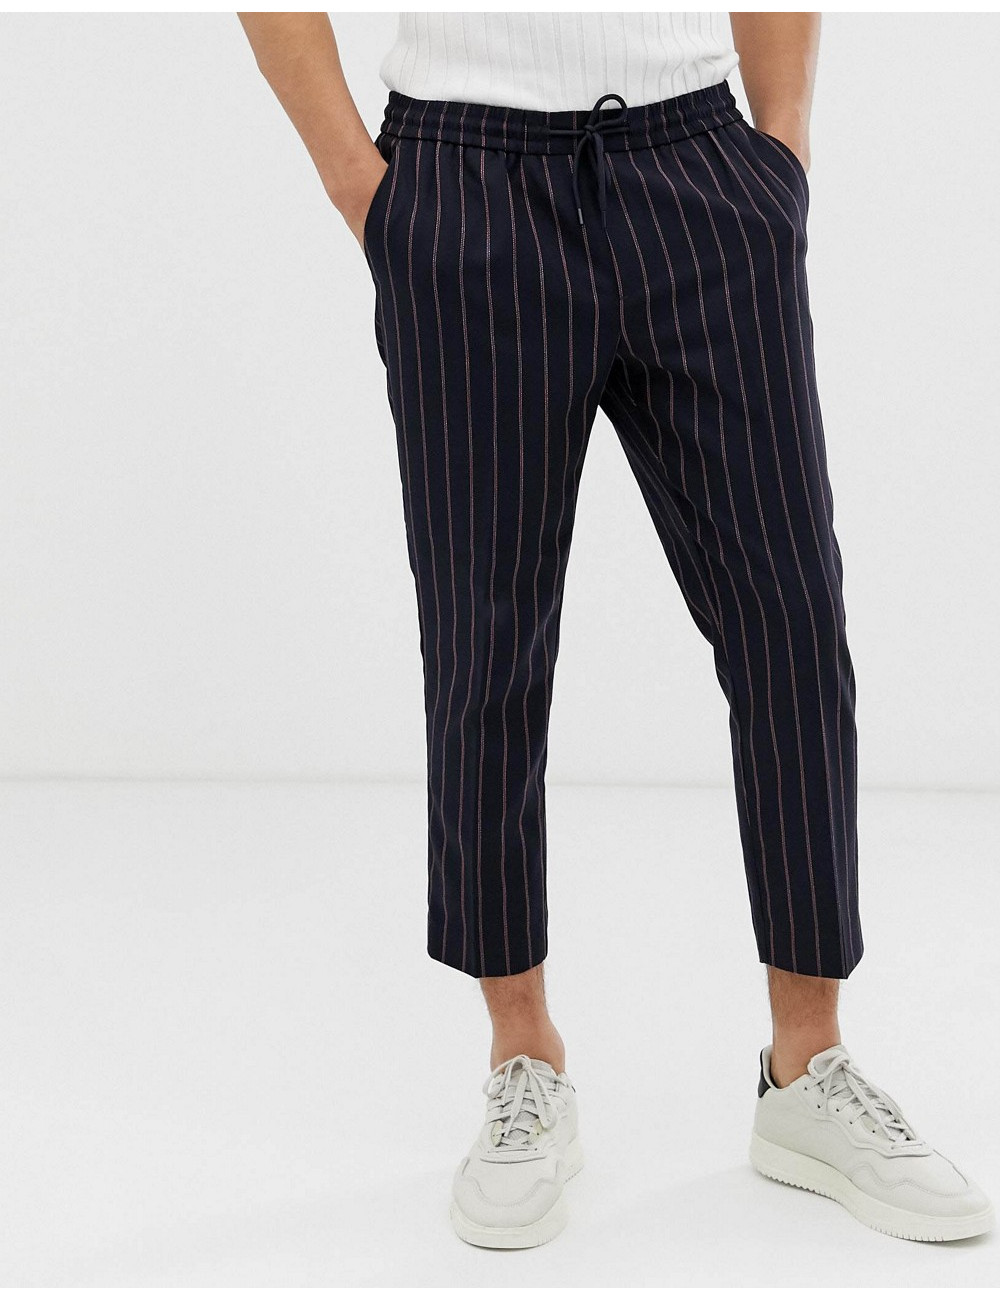 New Look pinstripe trousers...